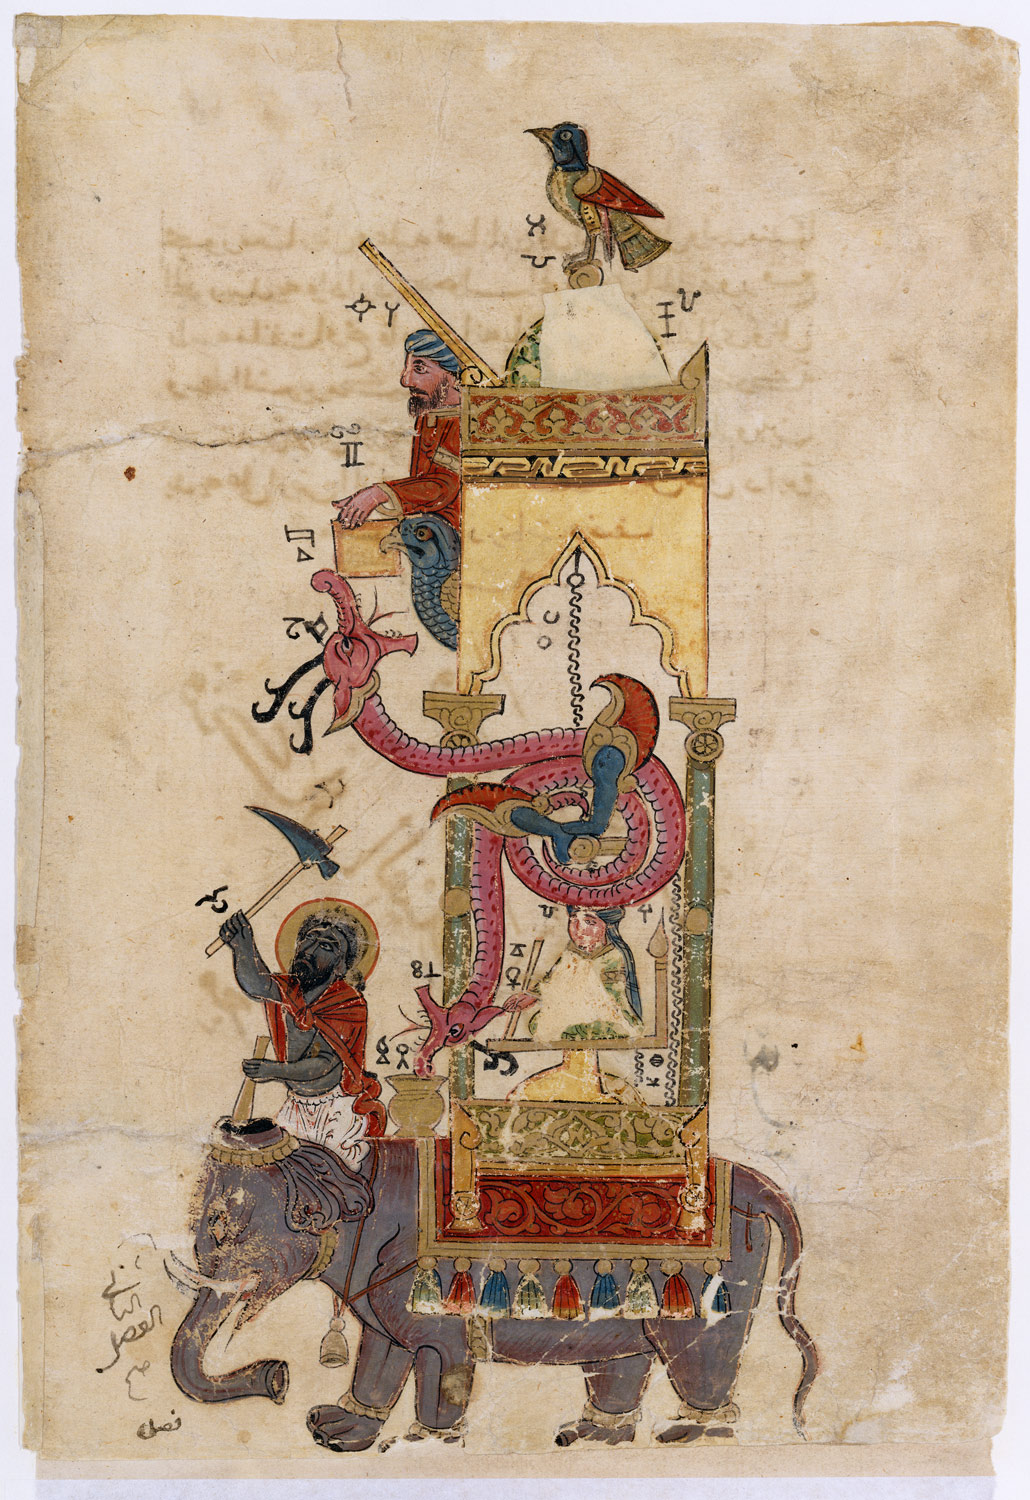 The Elephant Clock, Folio from a Book of the Knowledge of Ingenious Mechanical Devices by al-Jazari